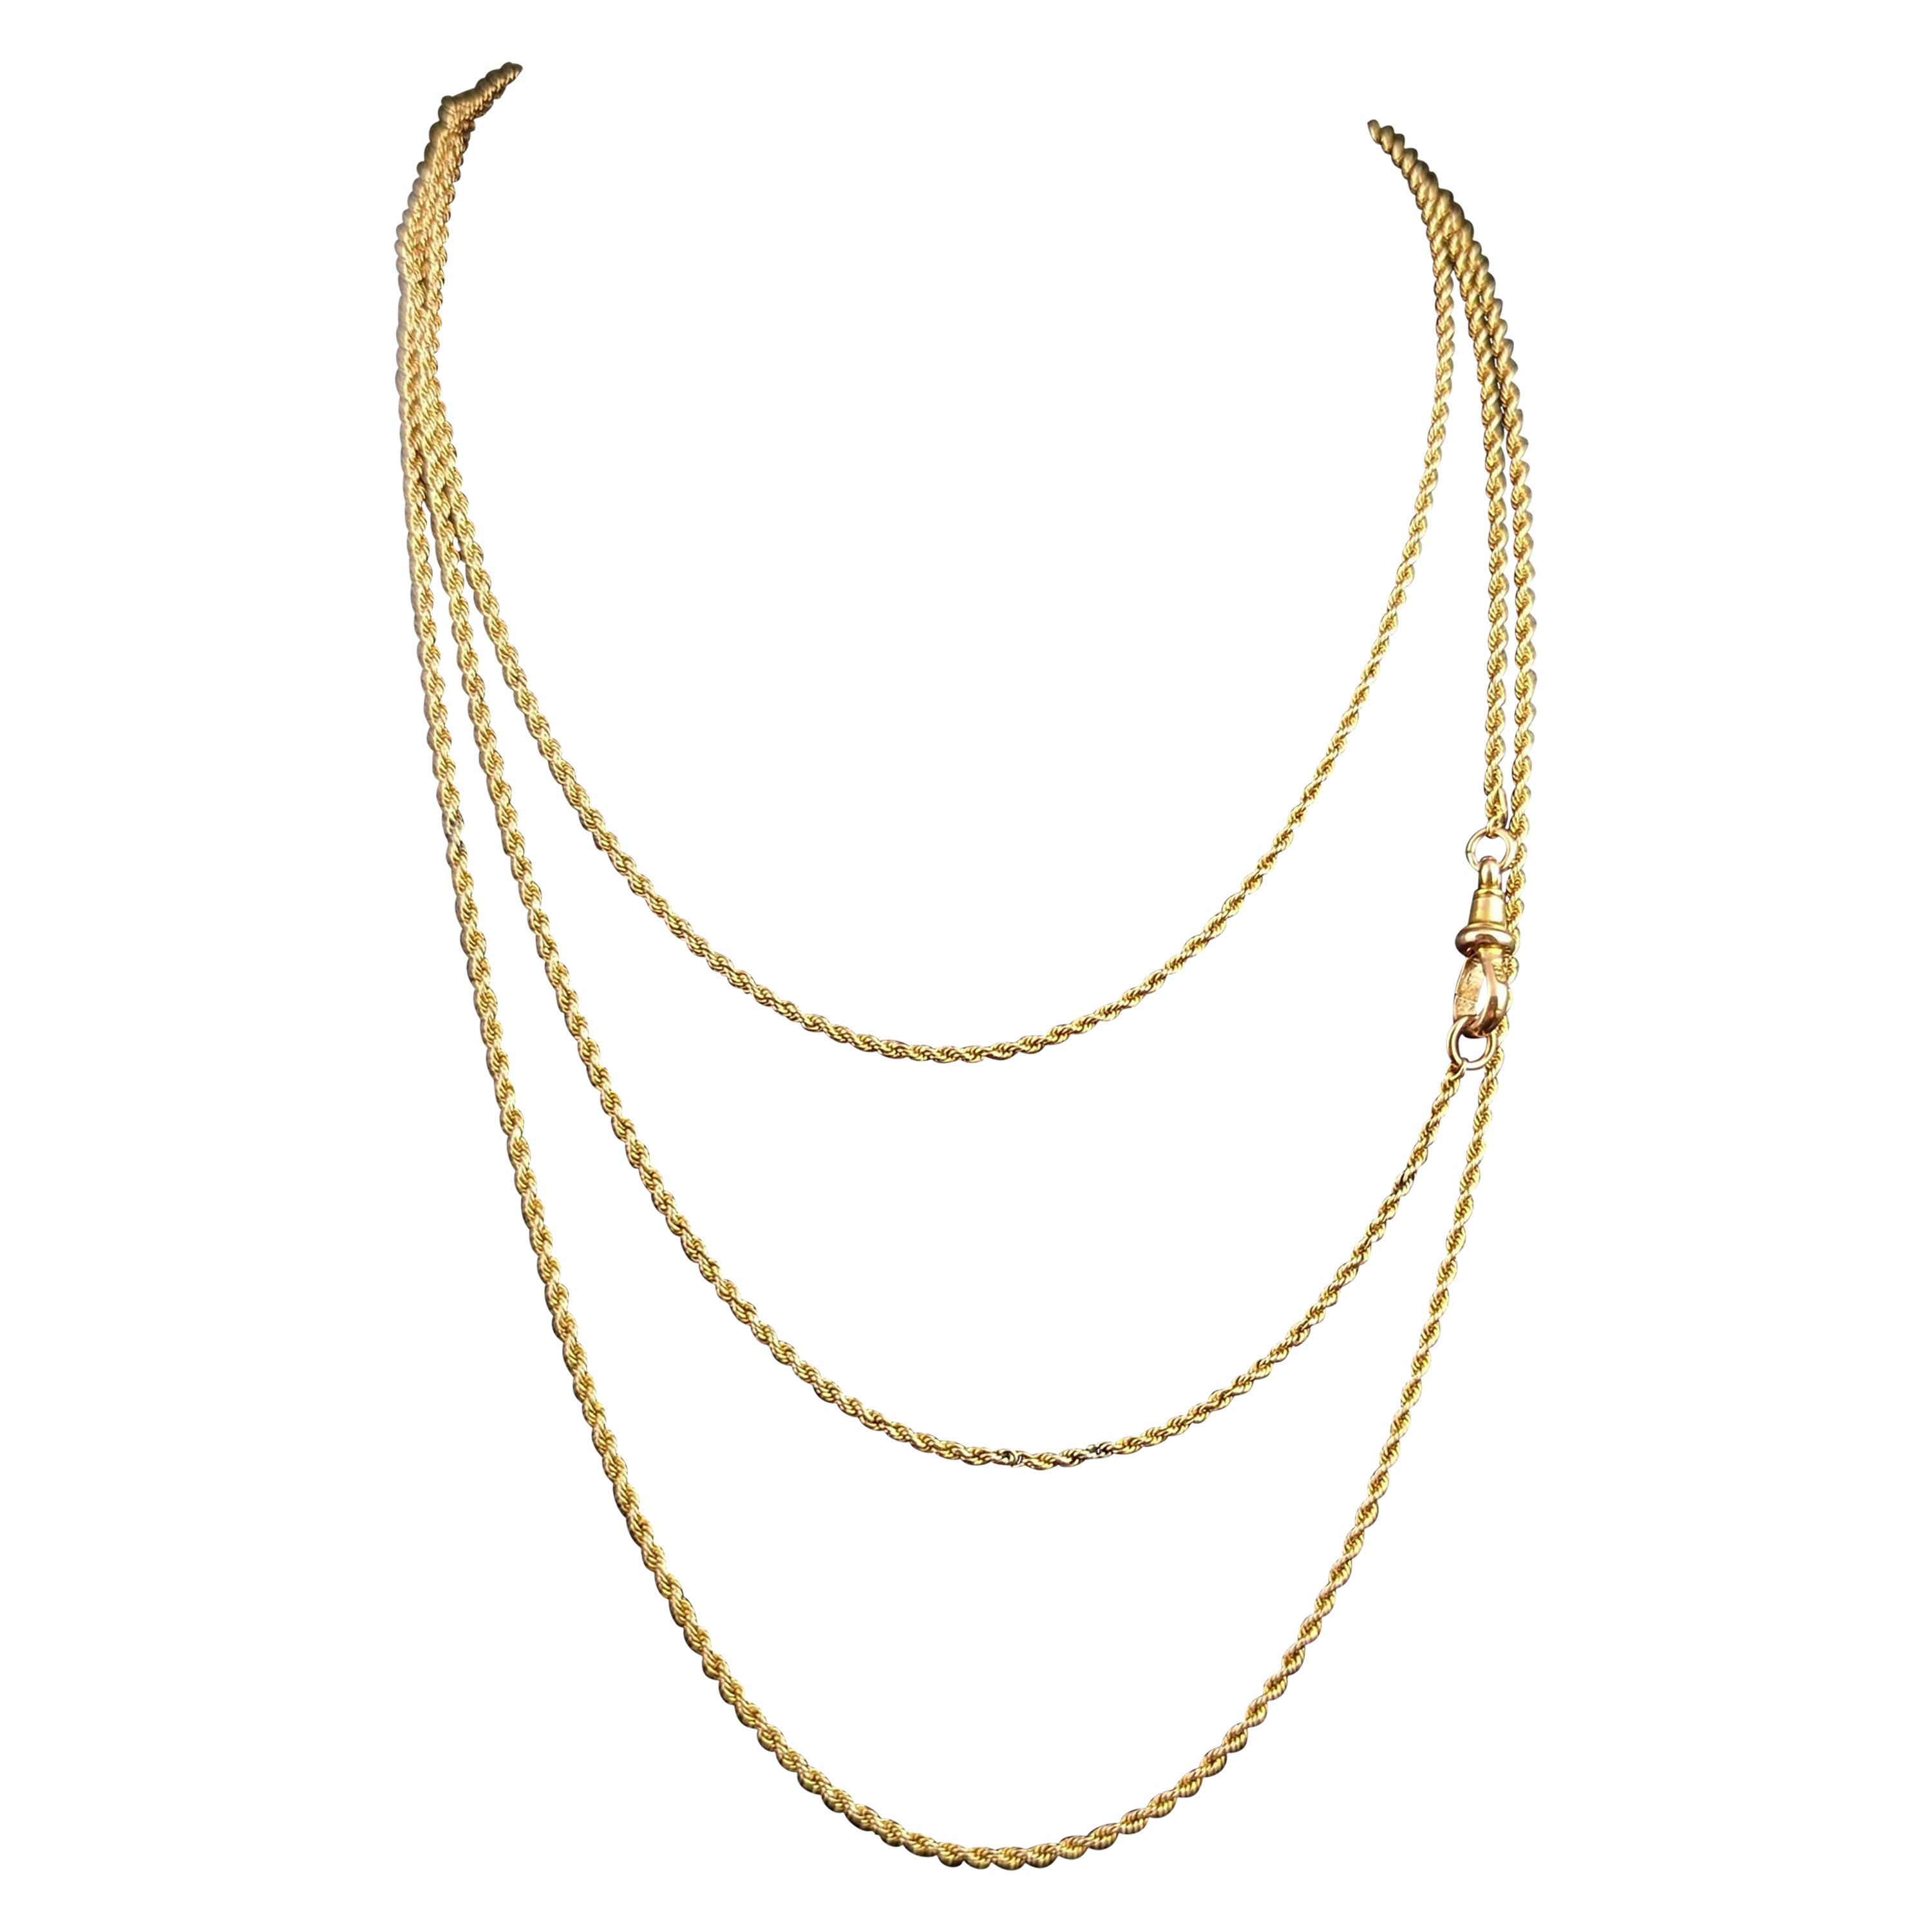 Antique 15k Yellow Gold Long Chain Necklace, Longuard, Rope Twist Link For Sale